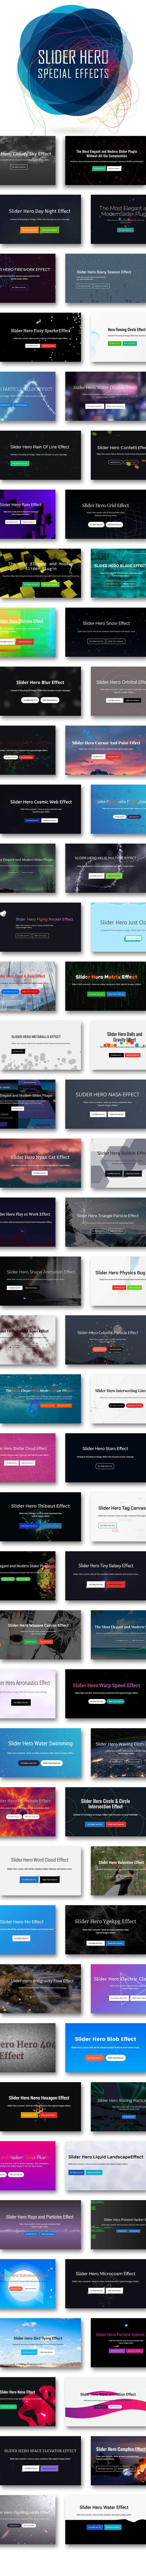 Slider Hero with Animation Effects, Video Background, Video Slider & Intro Maker - 9